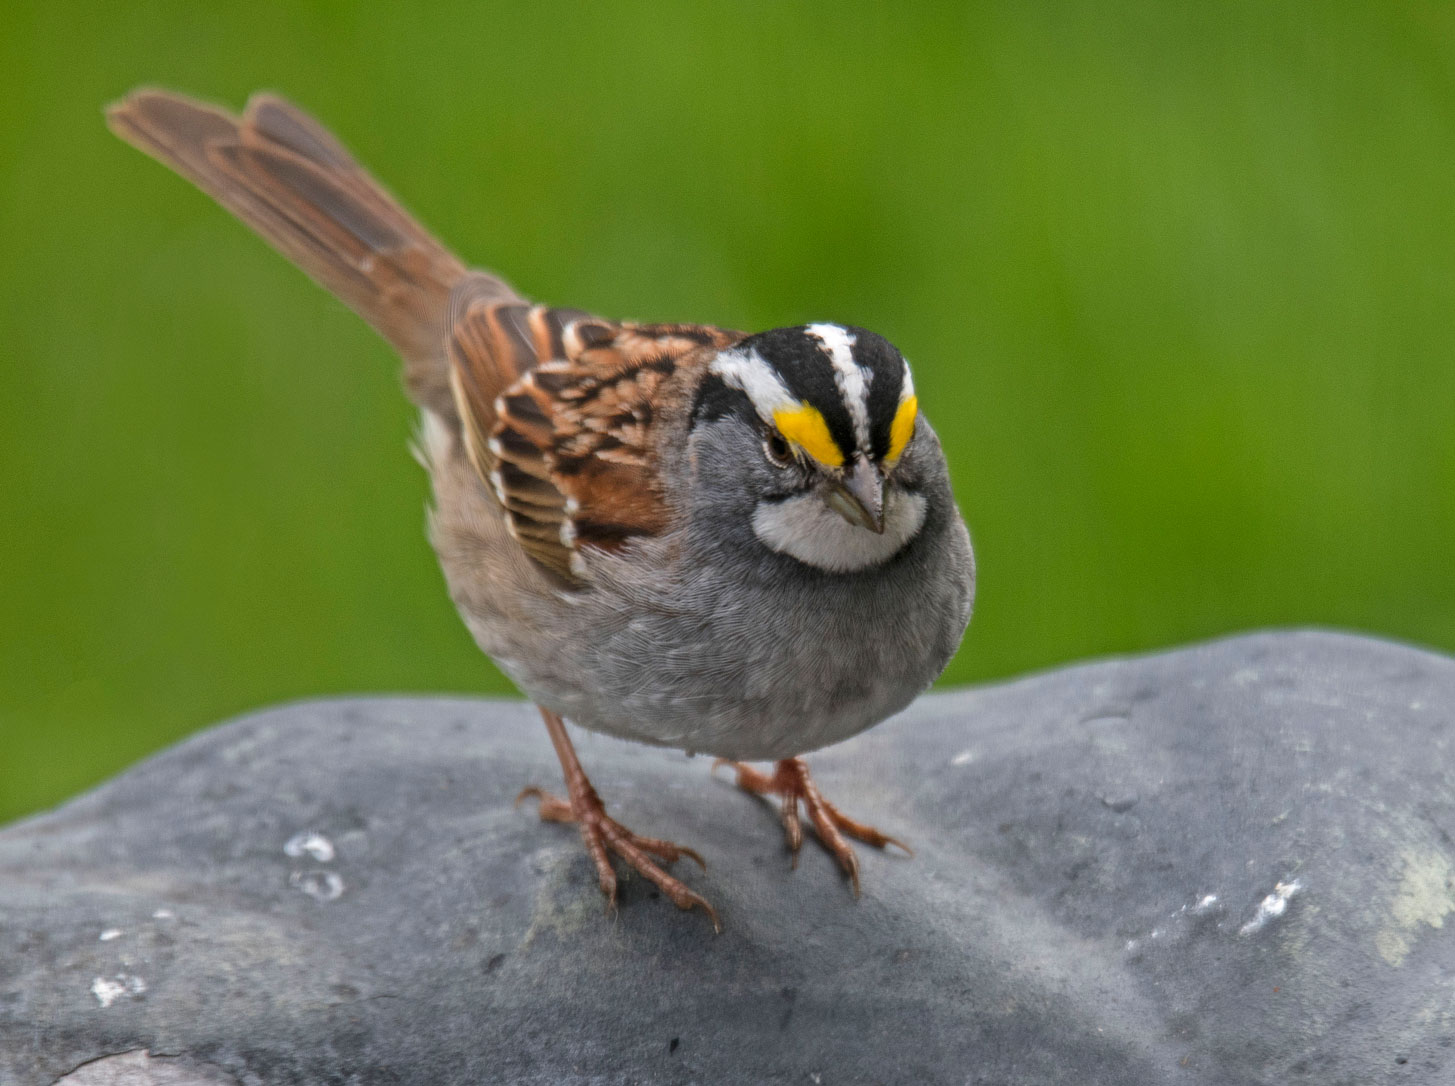 White throated. Sunny Sparrow. Sparrow desktop picture.